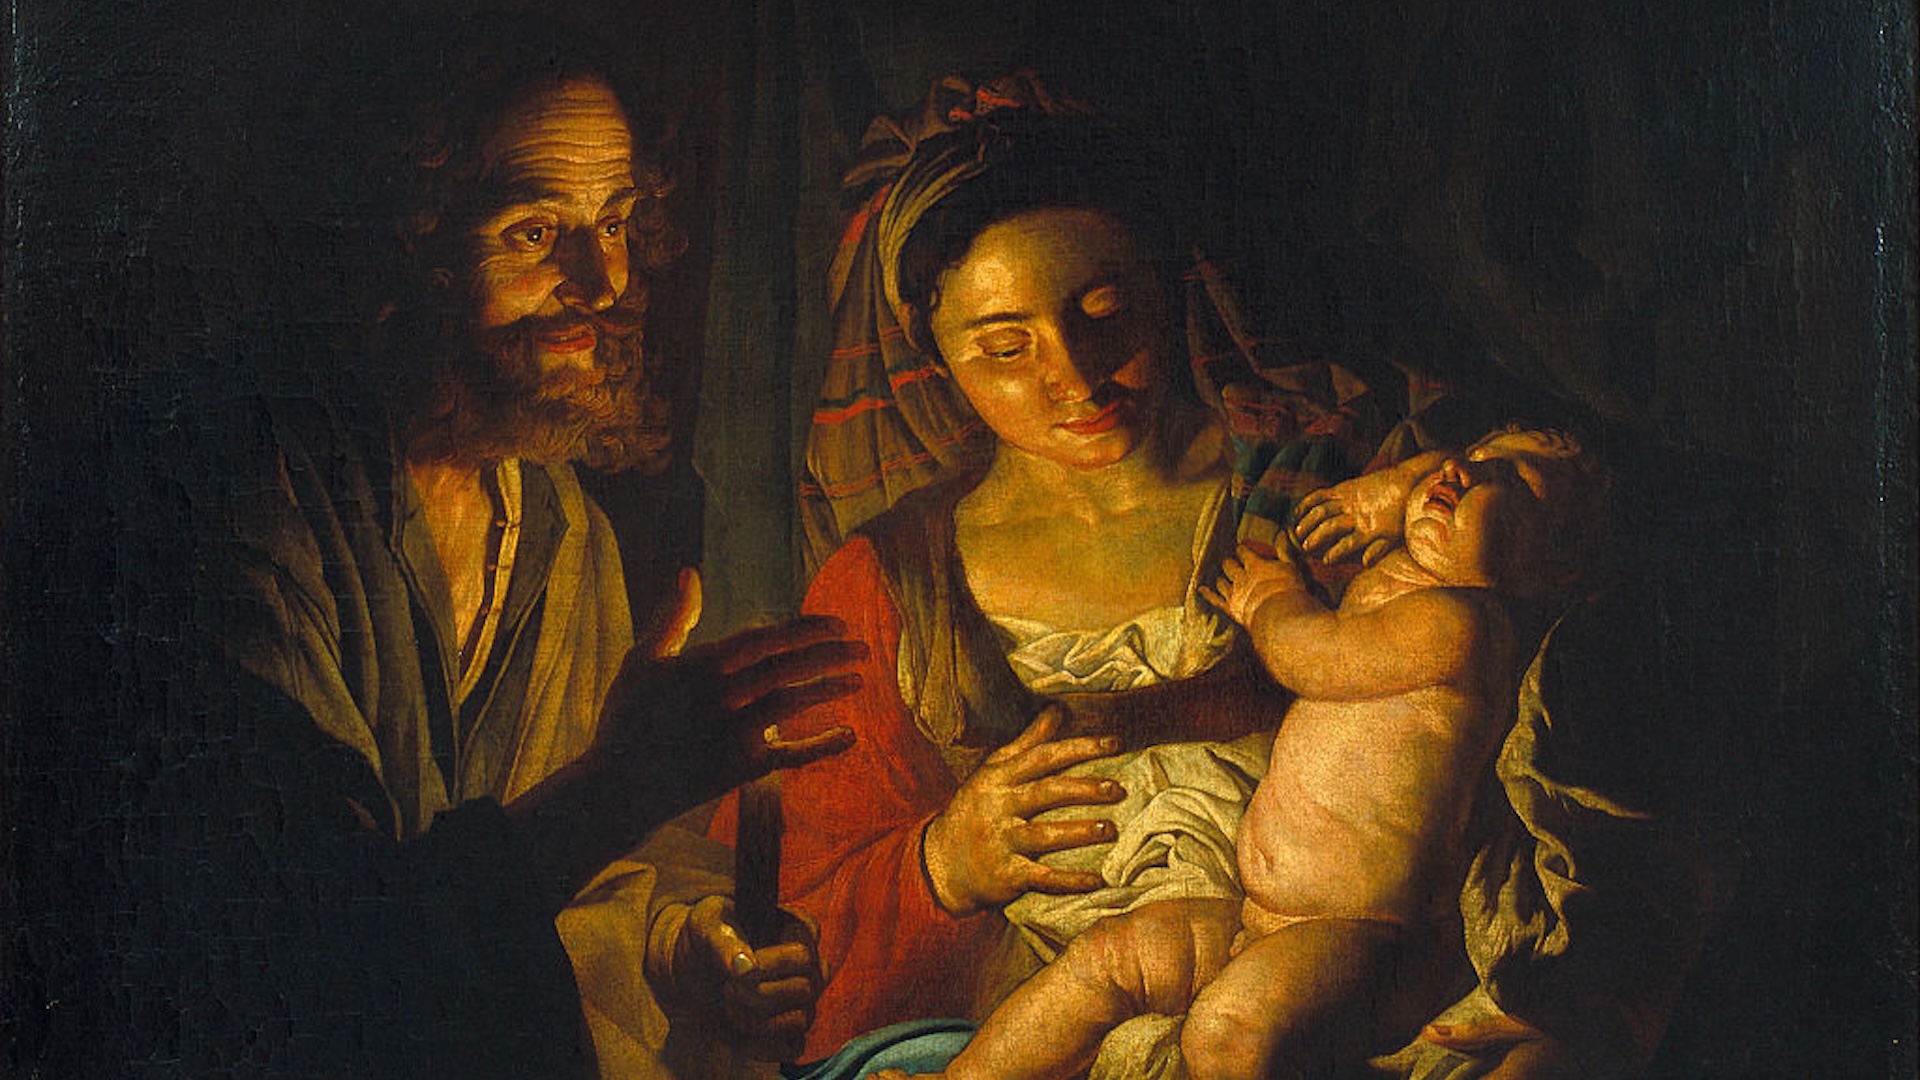 The Holy Family. Found in the collection of Museu Nacional d'Art de Catalunya, Barcelona.